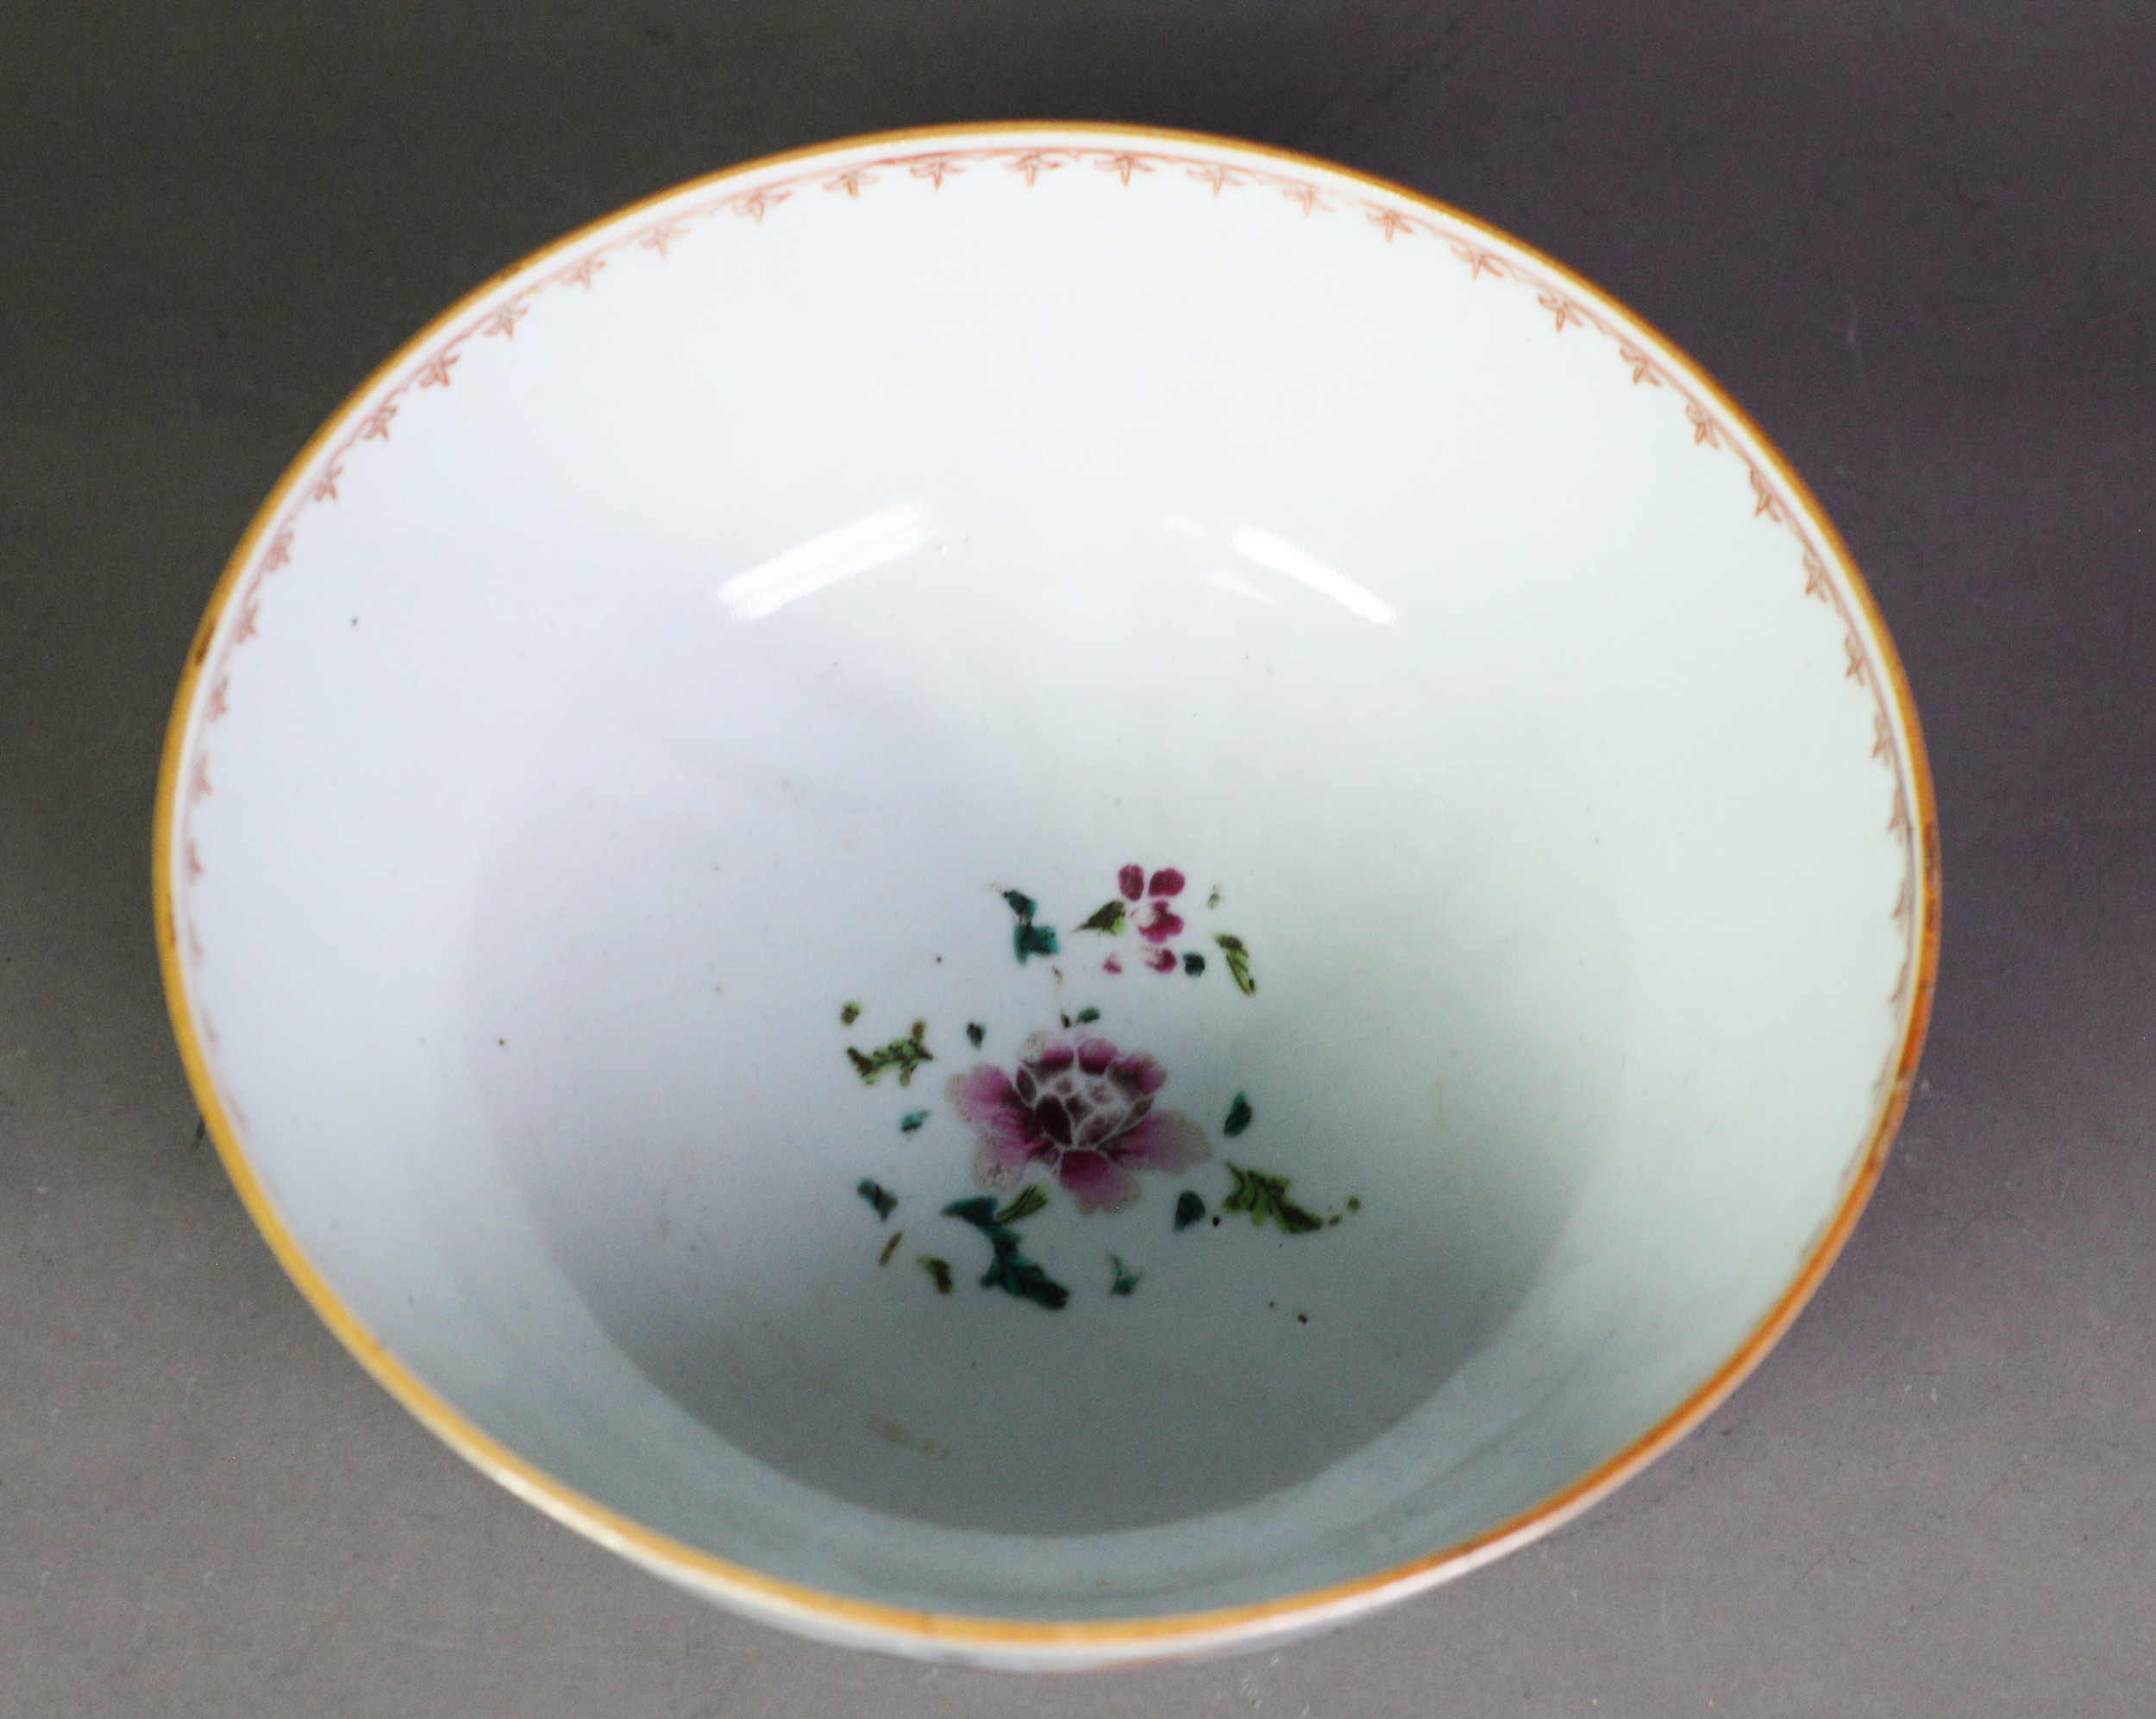 CHINESE LATE QING DYNASTY PORCELAIN FAMILLE ROSE BOWL enamelled with flowers framed within - Image 3 of 3